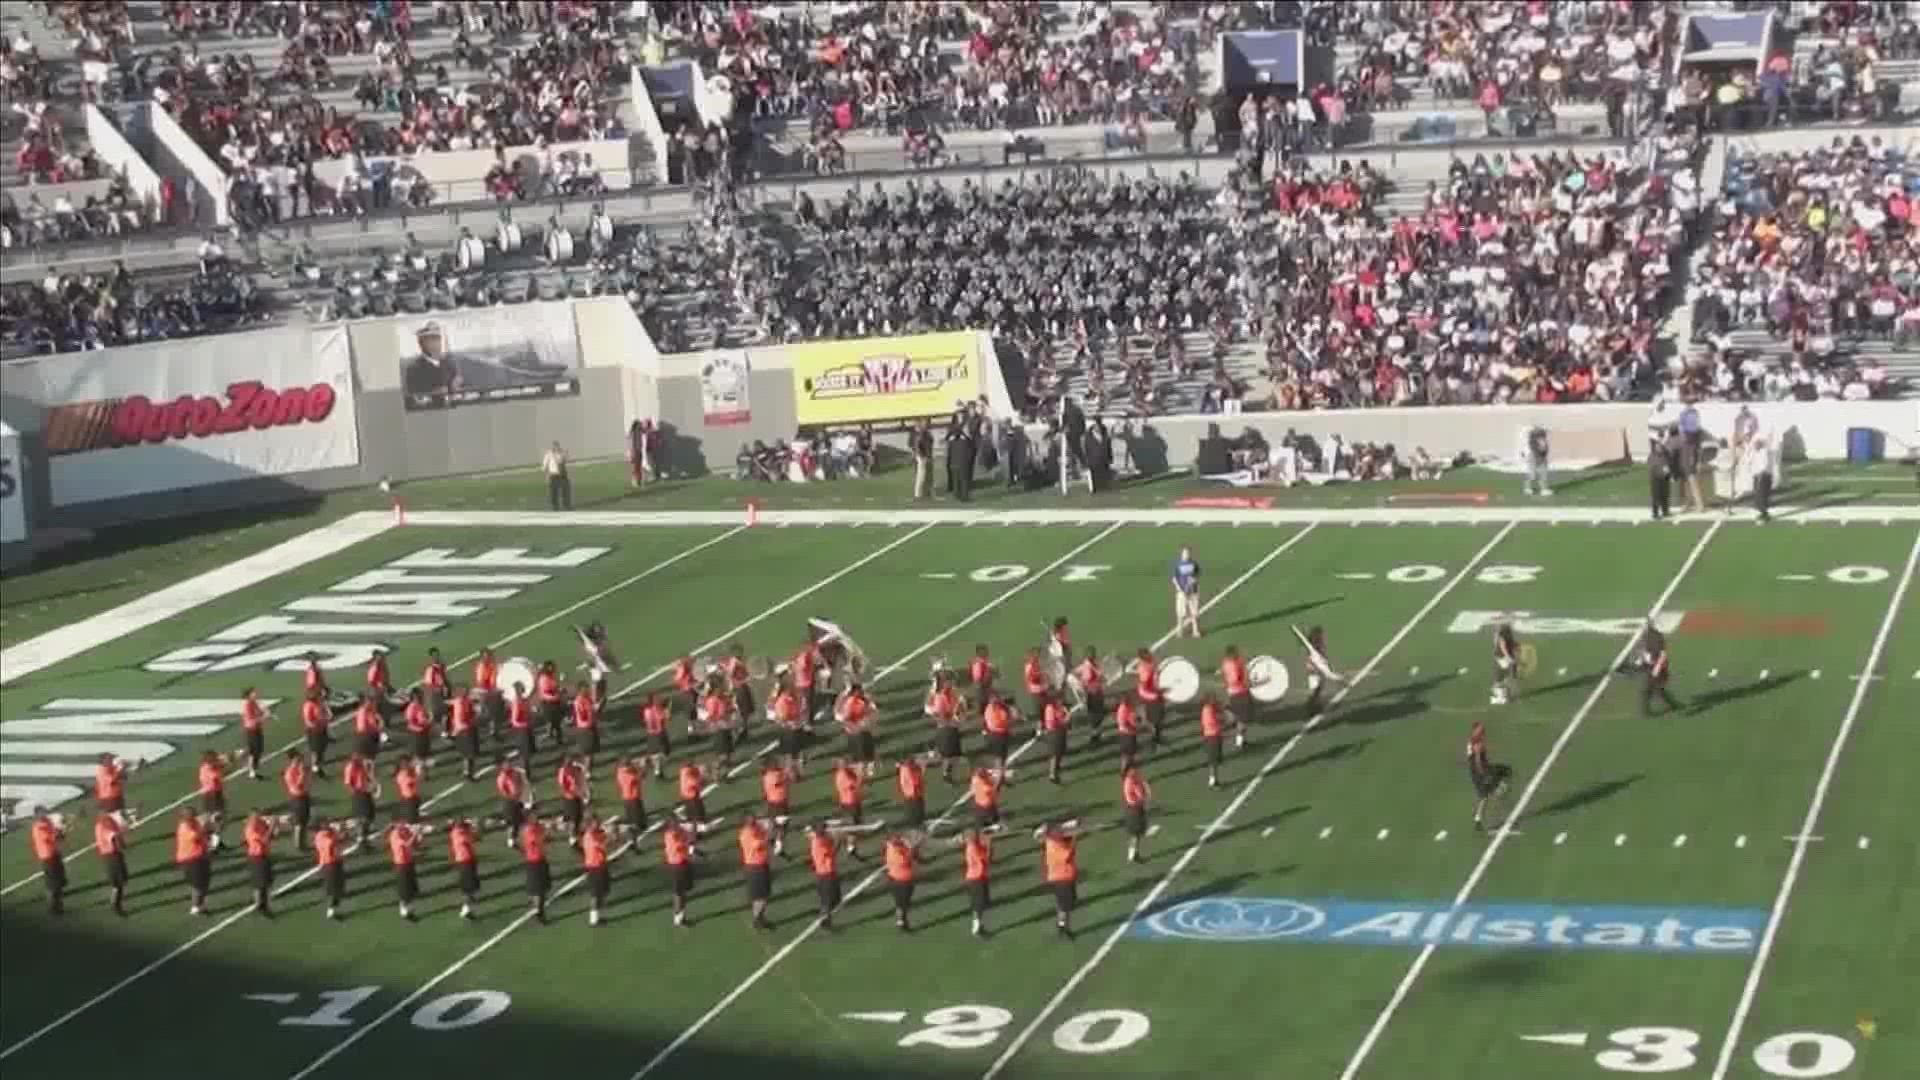 Two years after much of their equipment was stolen and vandalized, the Fairley High School marching band raised money to get back on their feet.